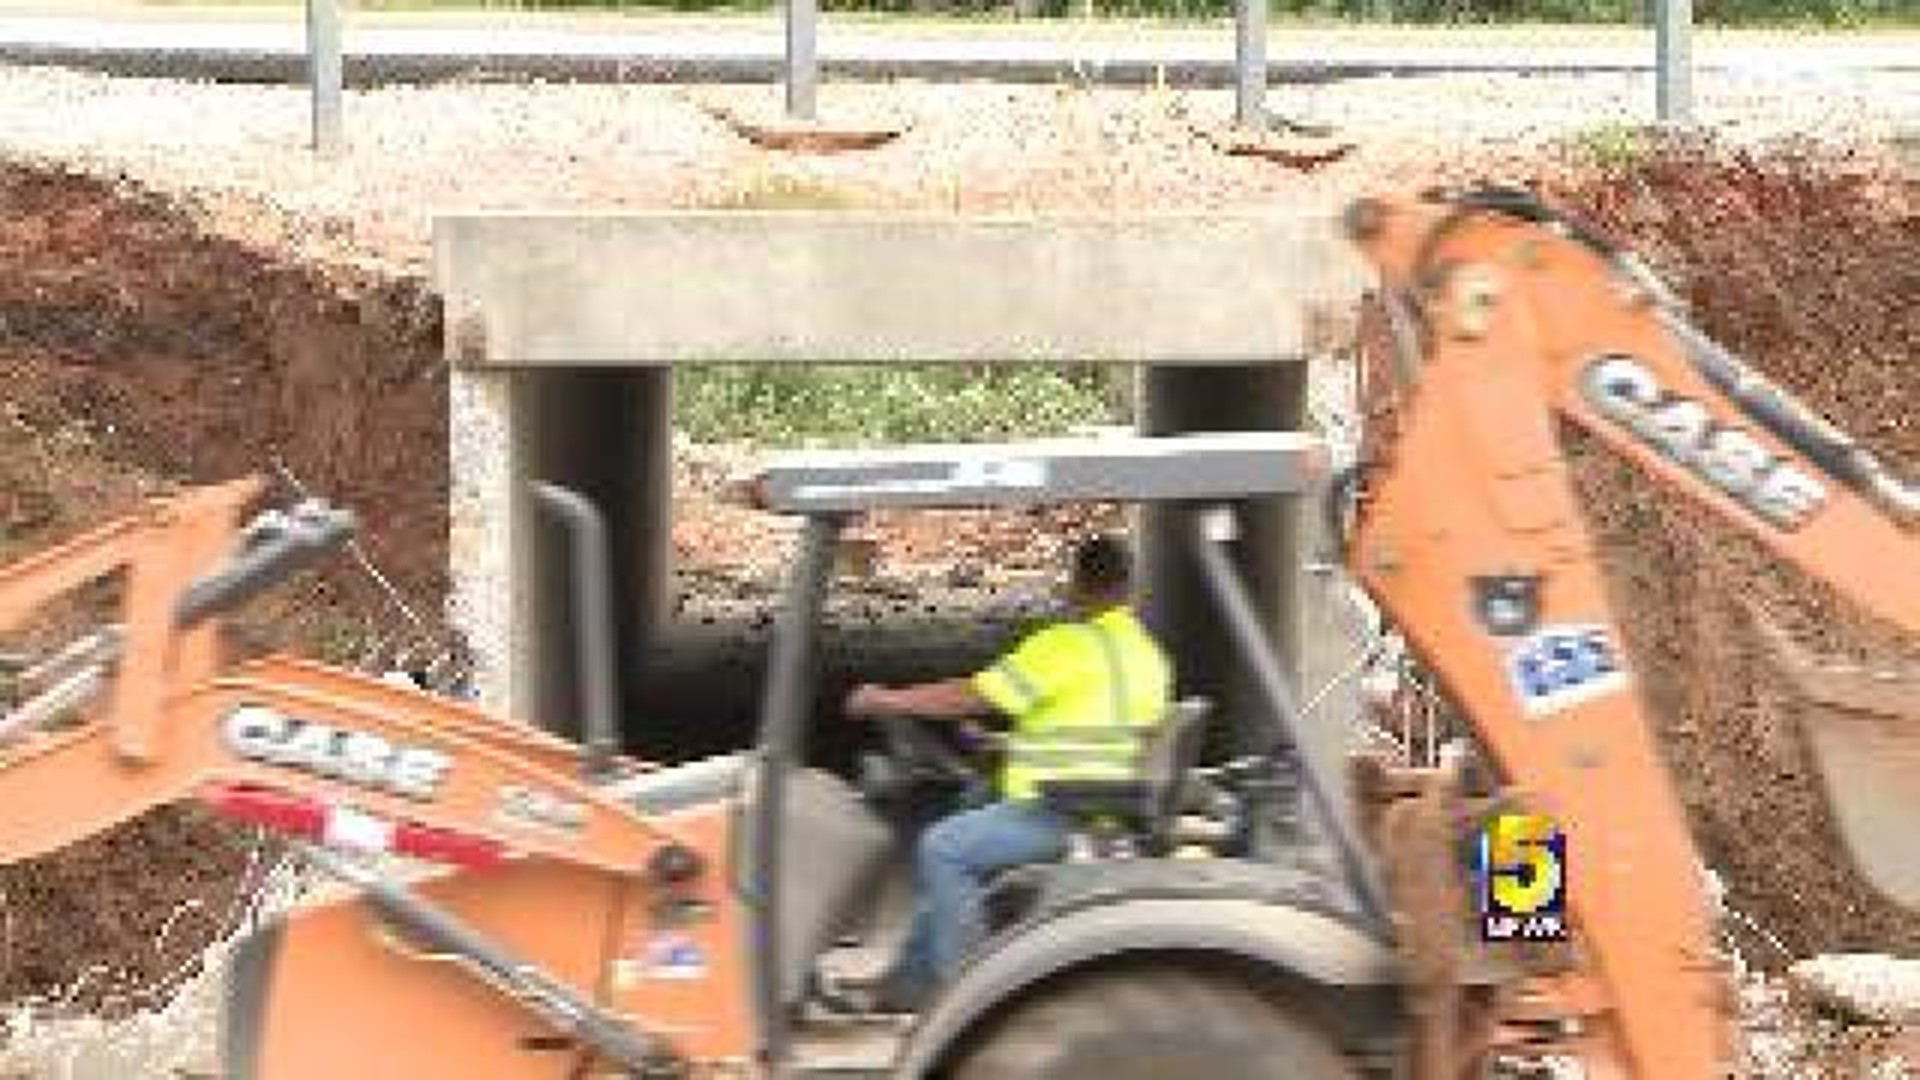 Over 40 Days Of Road Work At XNA May Cause Delays